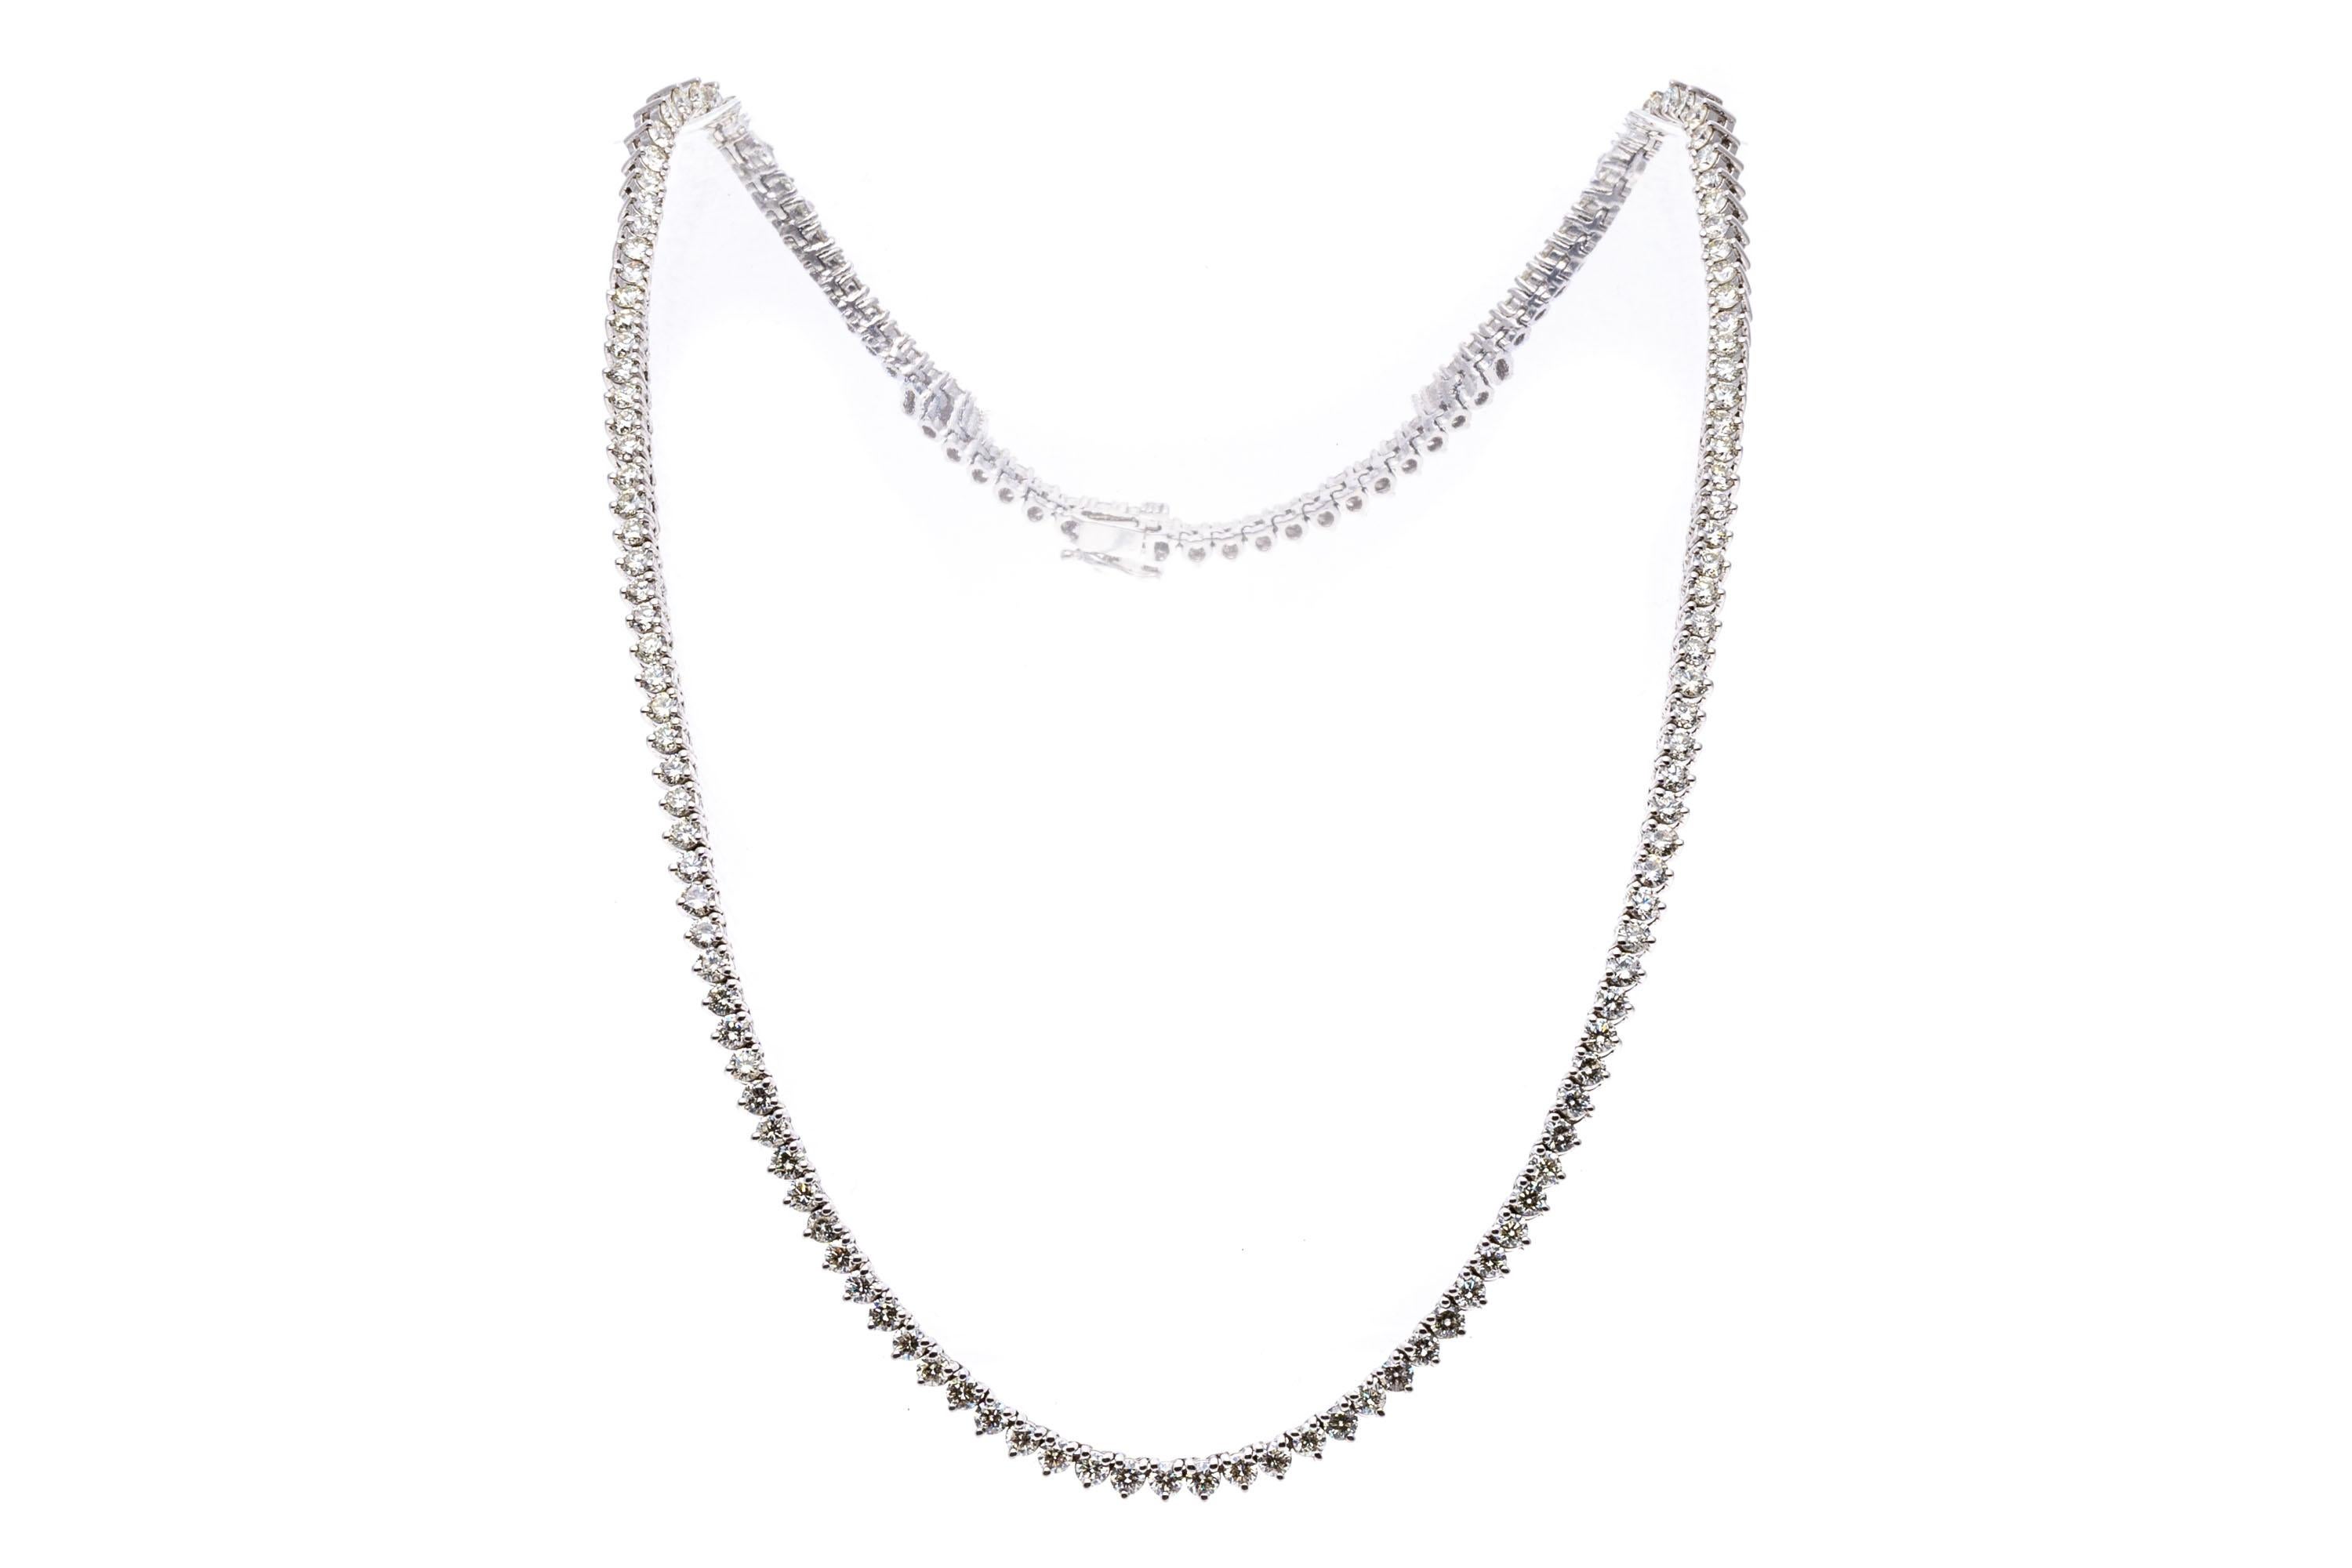 14k White Gold Brilliant Cut Diamond Line Necklace, Approximately 11.32 TCW For Sale 3